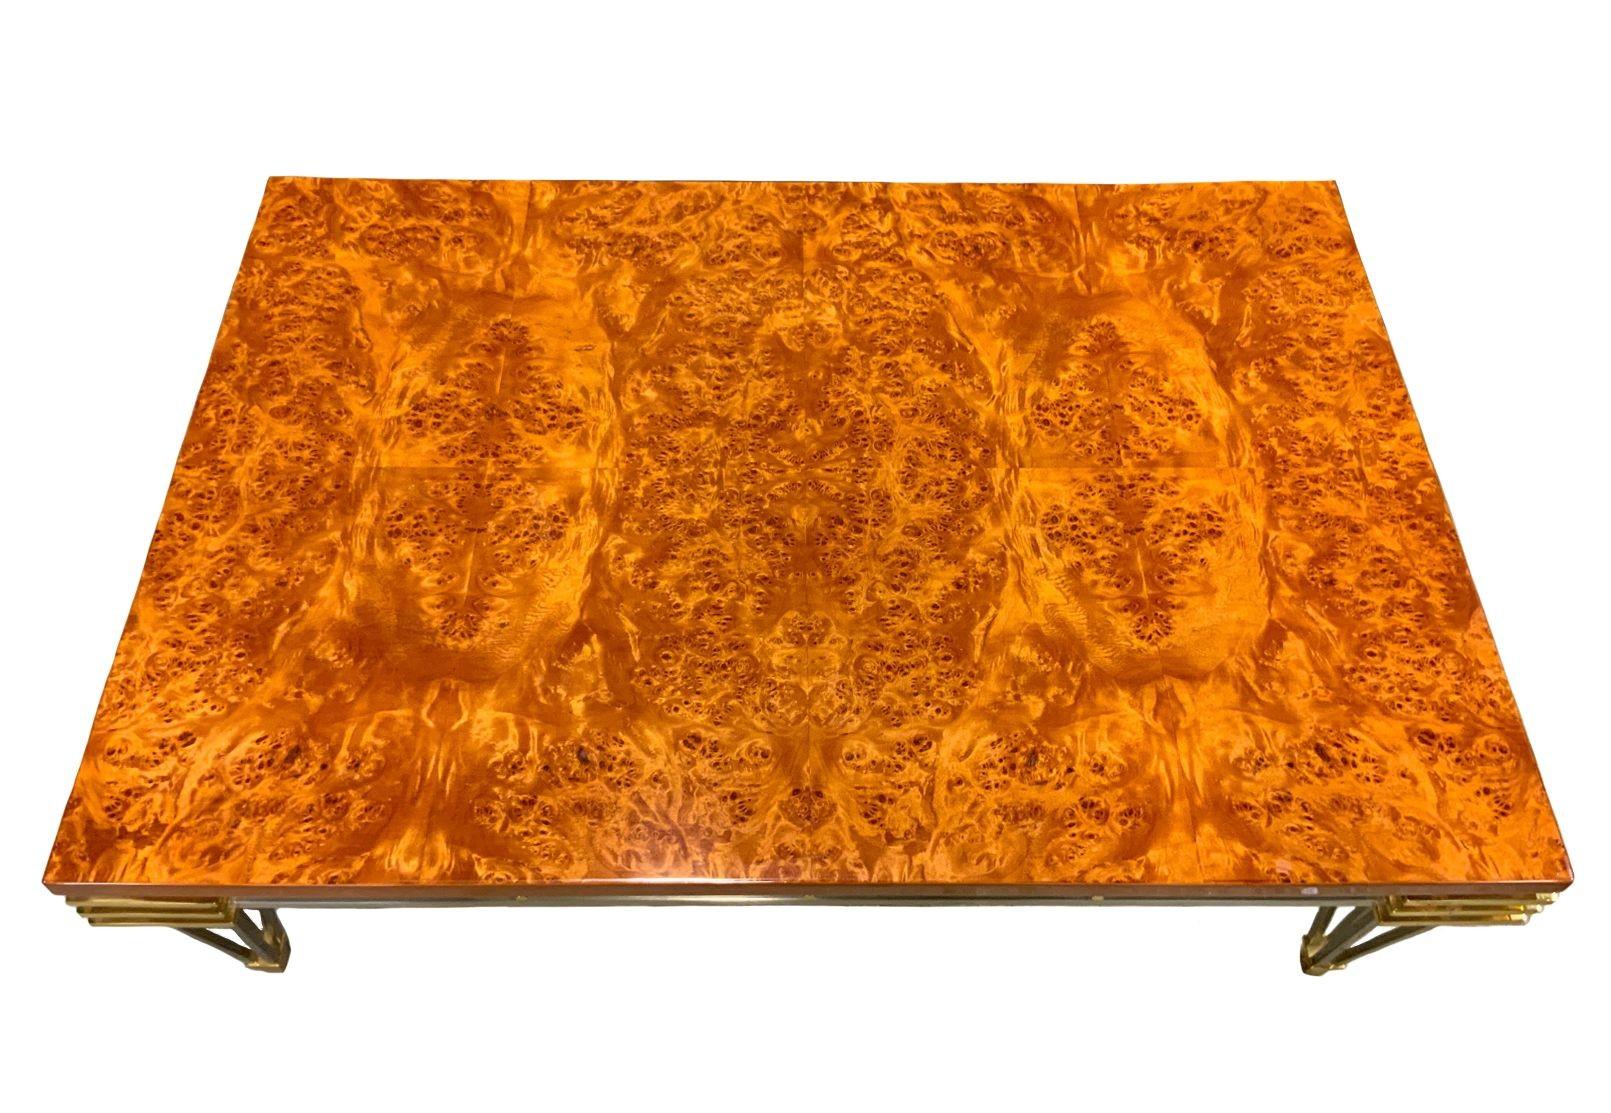 Stunning mid-century coffee table by Paul M. Jones showcasing captivating eye burl wood top in beautiful vibrant tones, exuding warmth to the piece. The table's brushed stainless steel frame not only ensures durability but also adds a sleek and